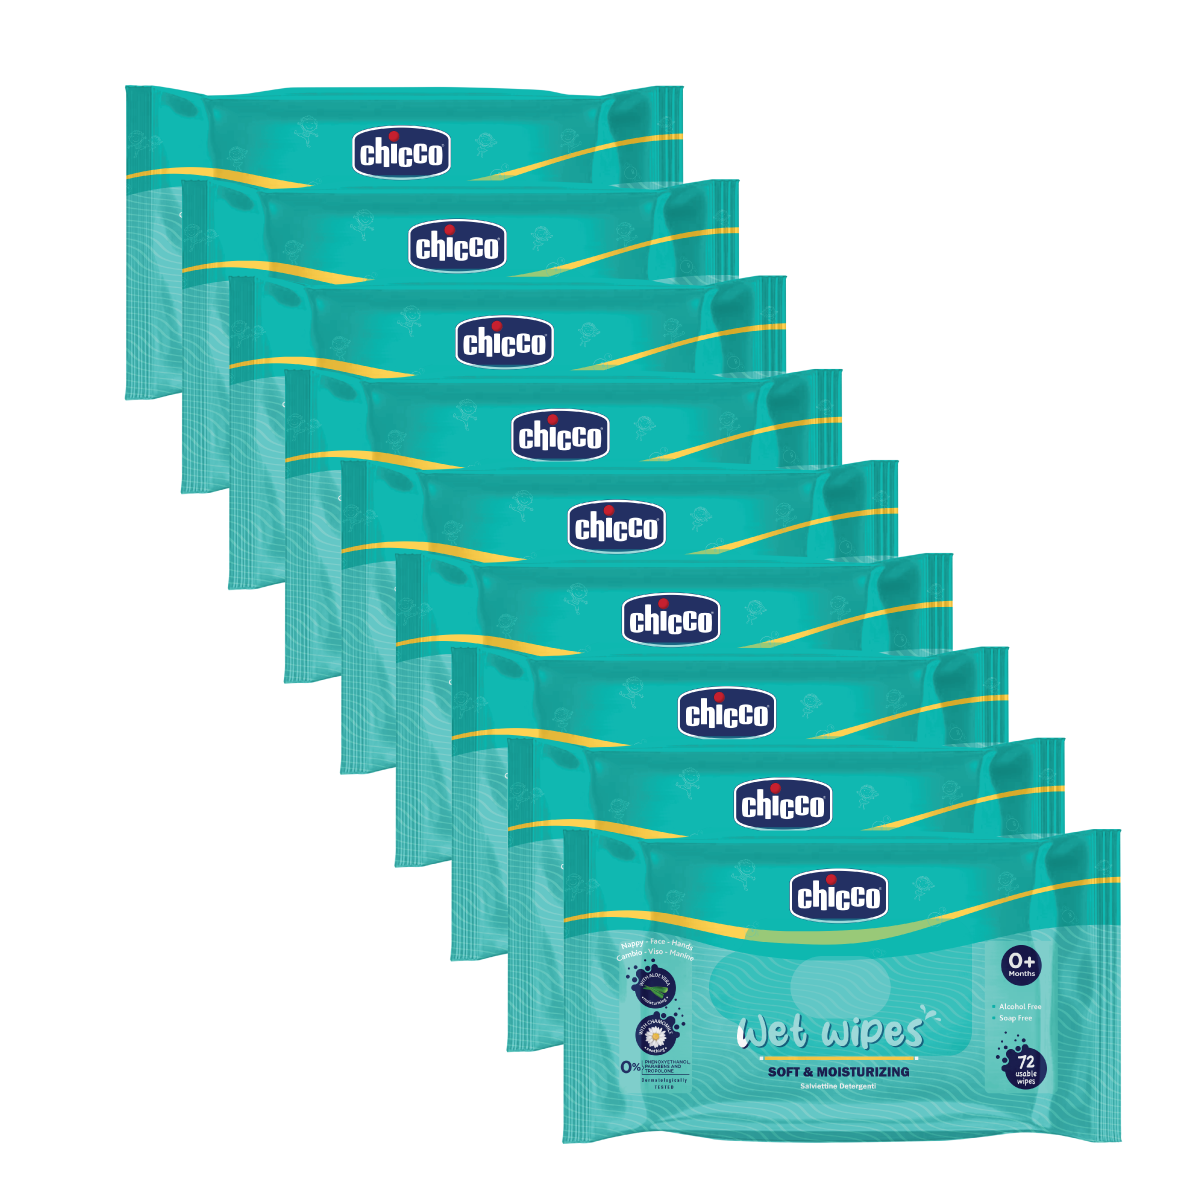 Chicco Wetwipes Pack of 5-648 PCS